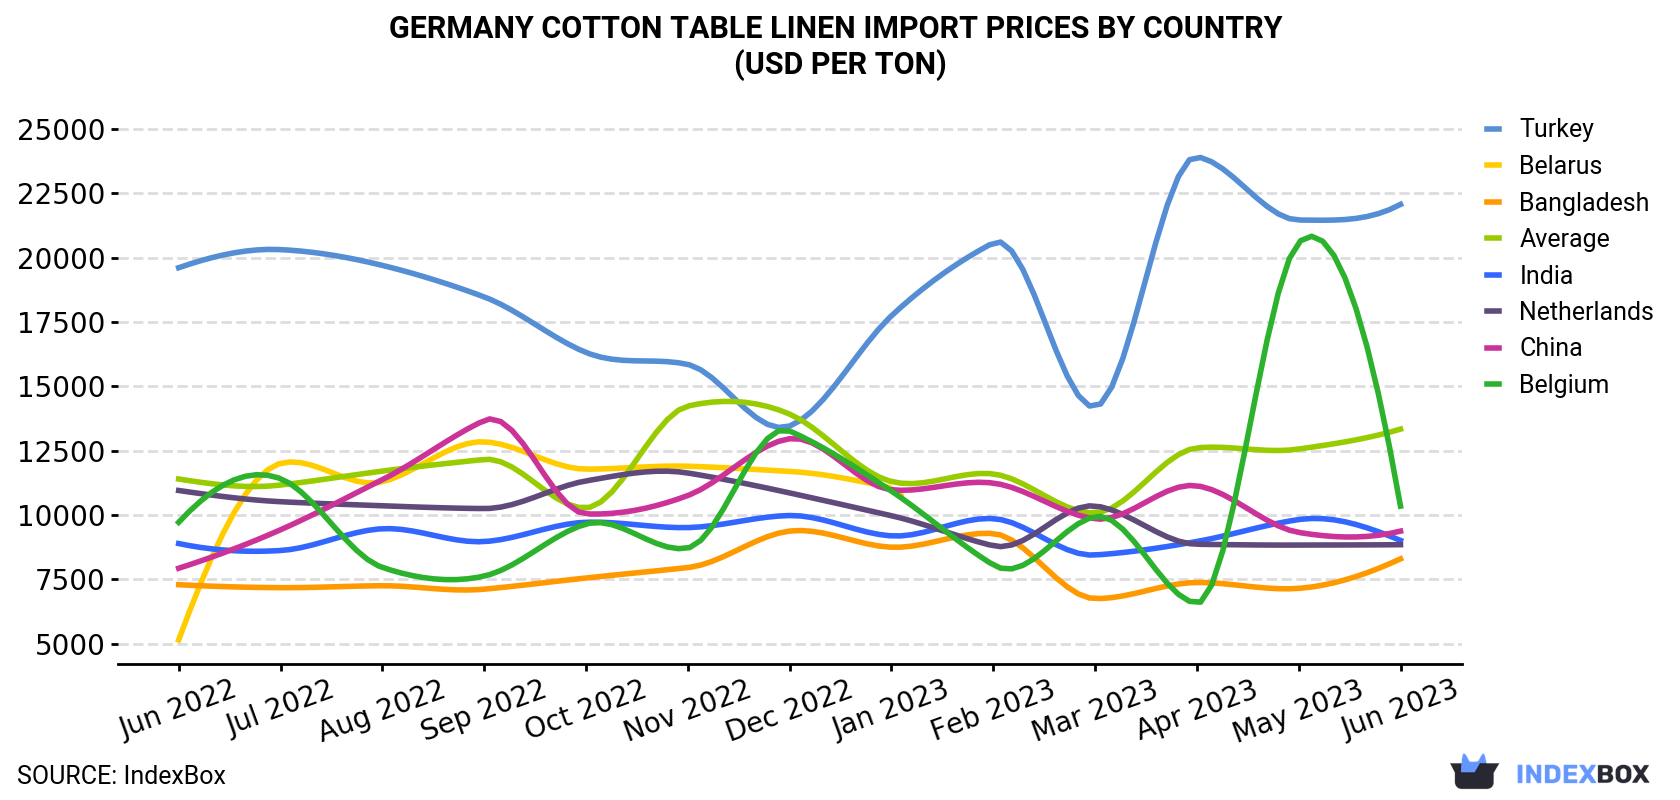 Germany Cotton Table Linen Import Prices By Country (USD Per Ton)